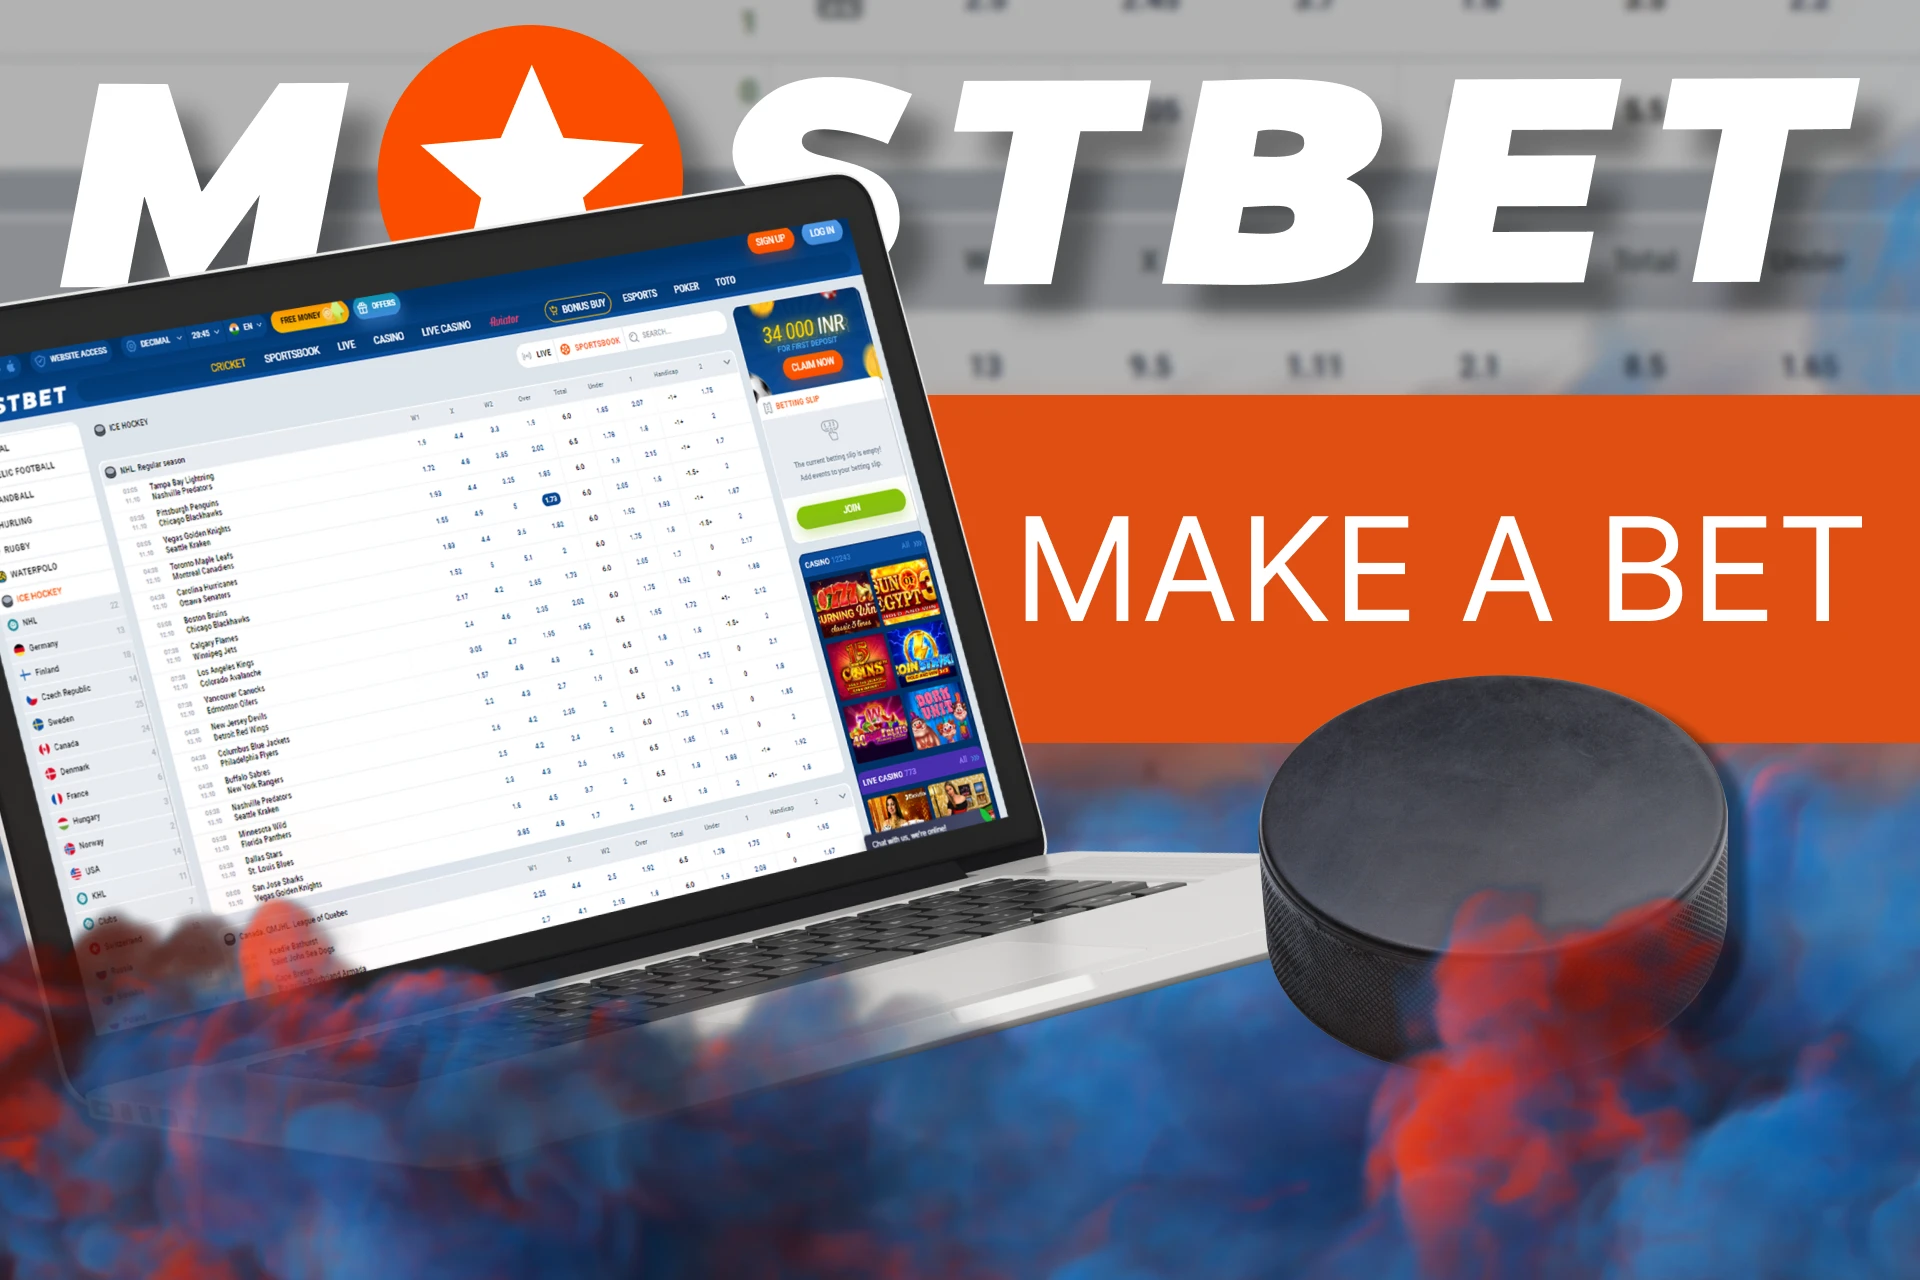 Try to following these tips from Mostbet to win betting on ice hockey.